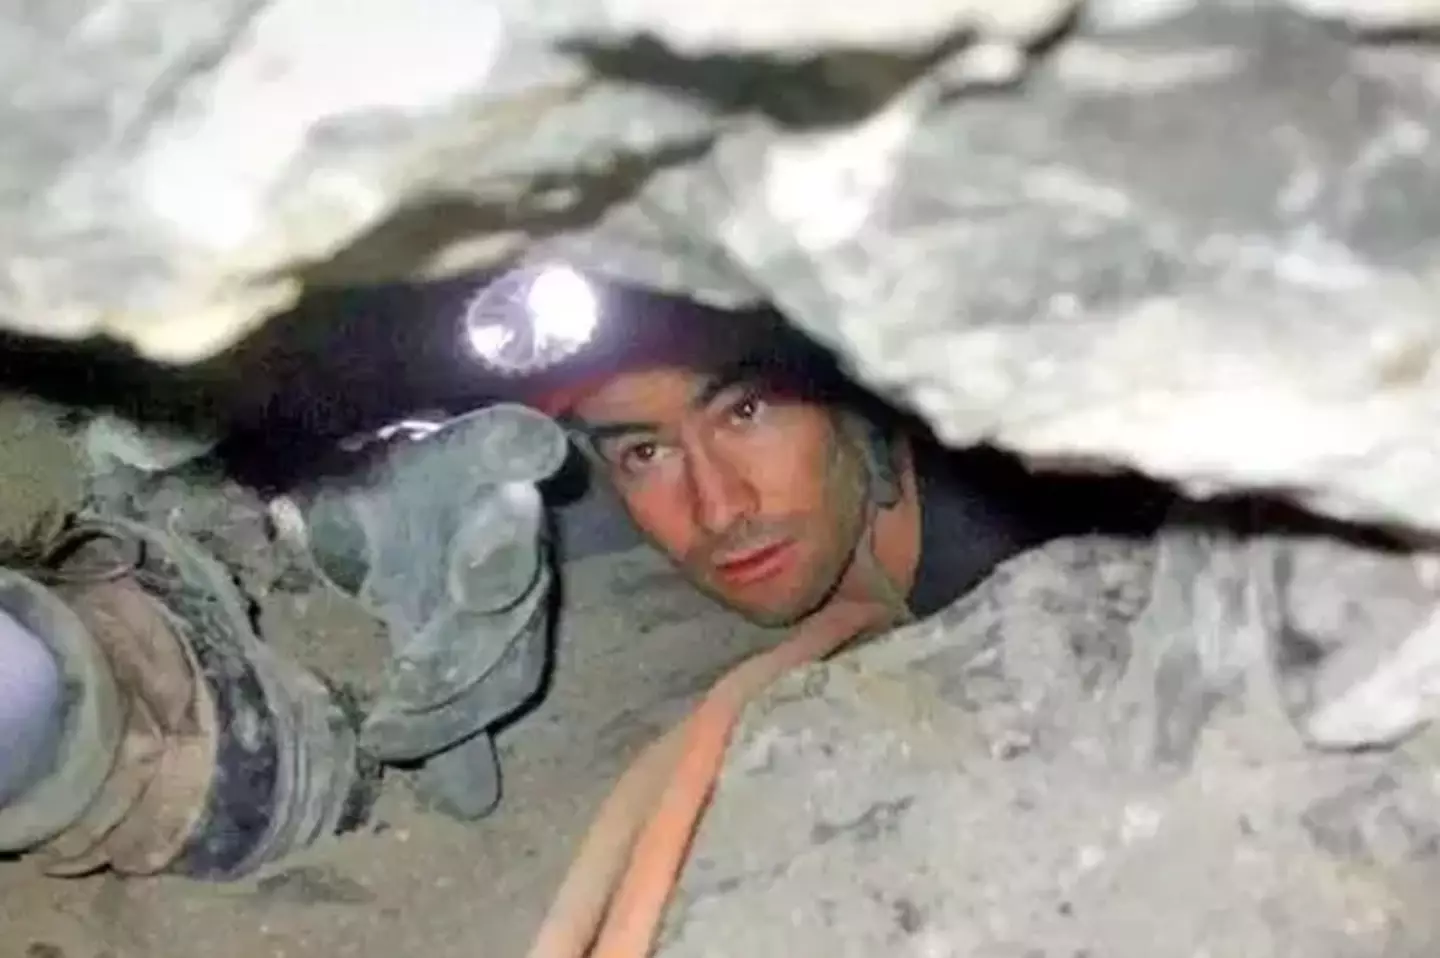 Rescuers tried to rescue Jones from the cave.